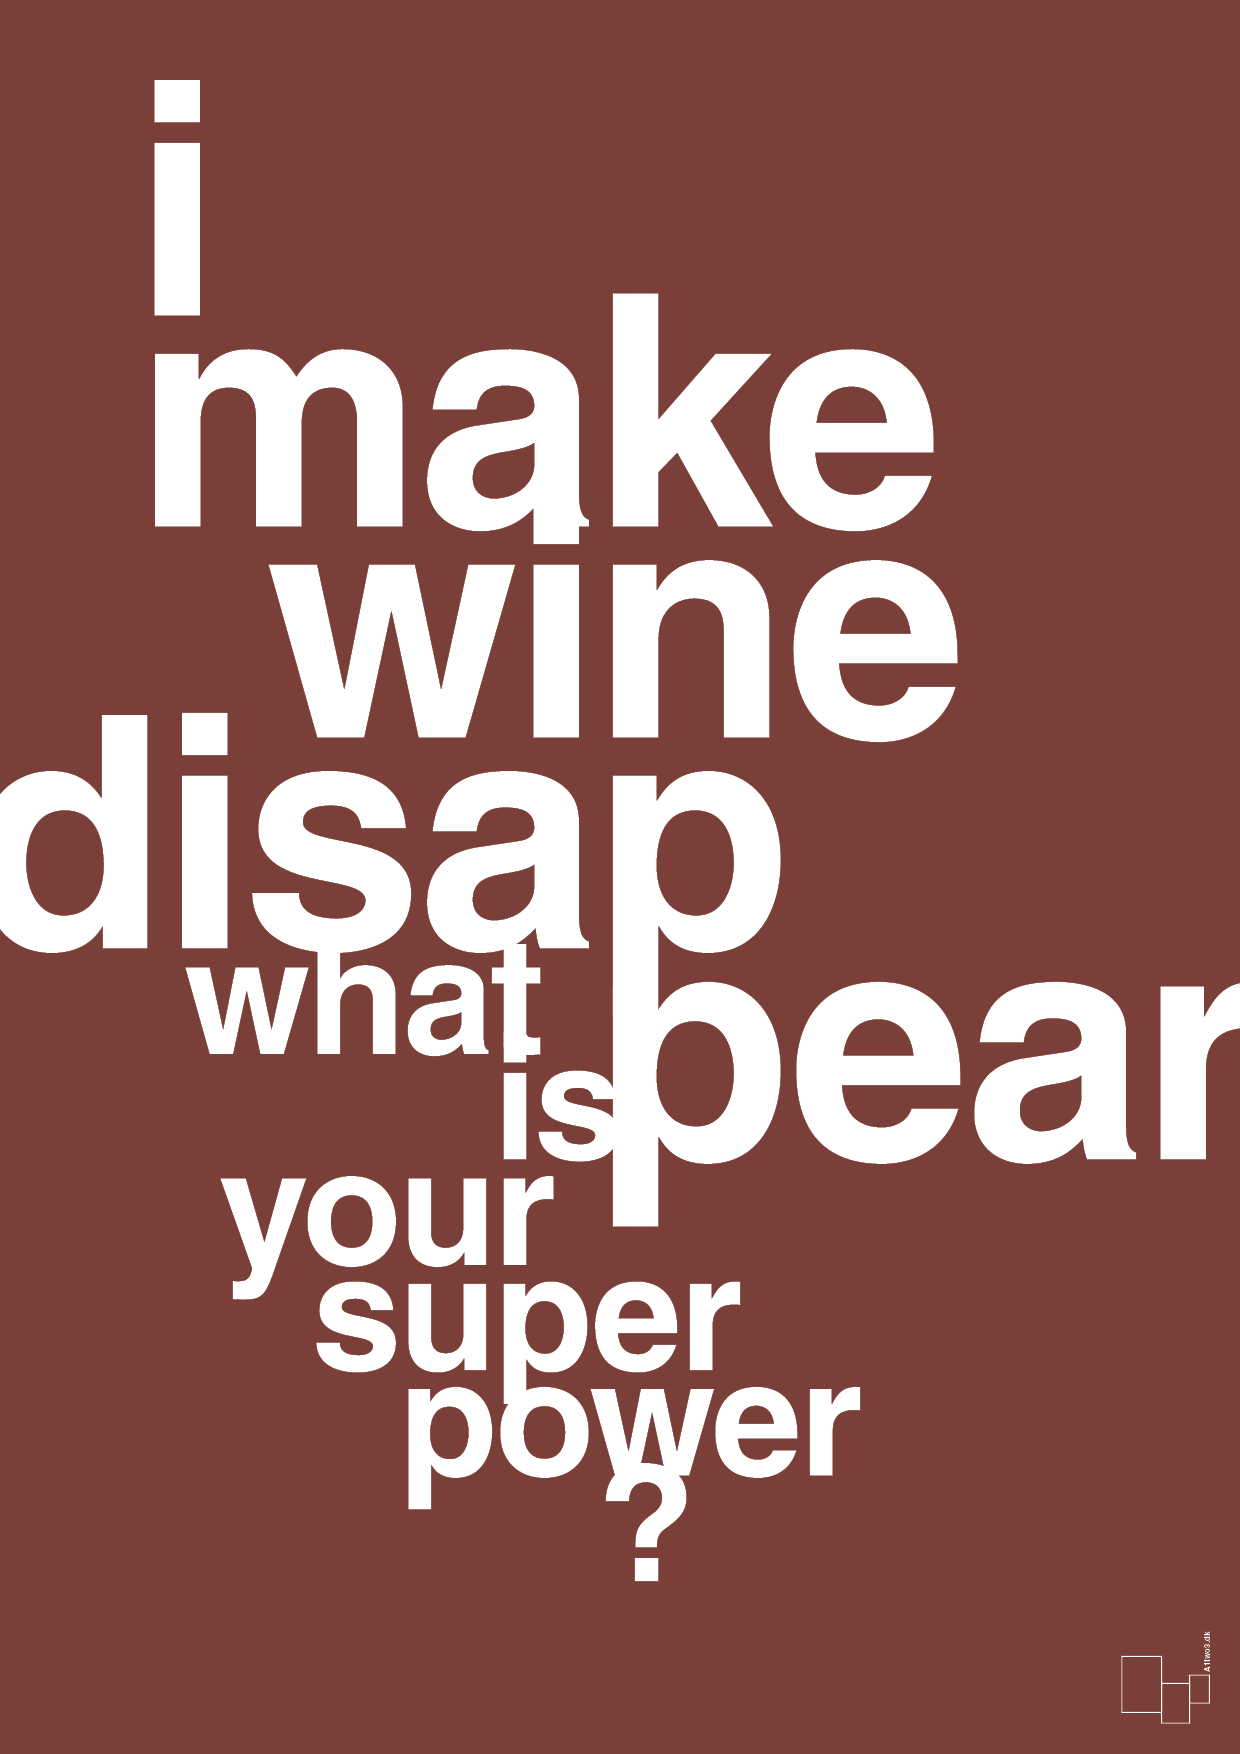 i make wine disappear what is your super power - Plakat med Mad & Drikke i Red Pepper